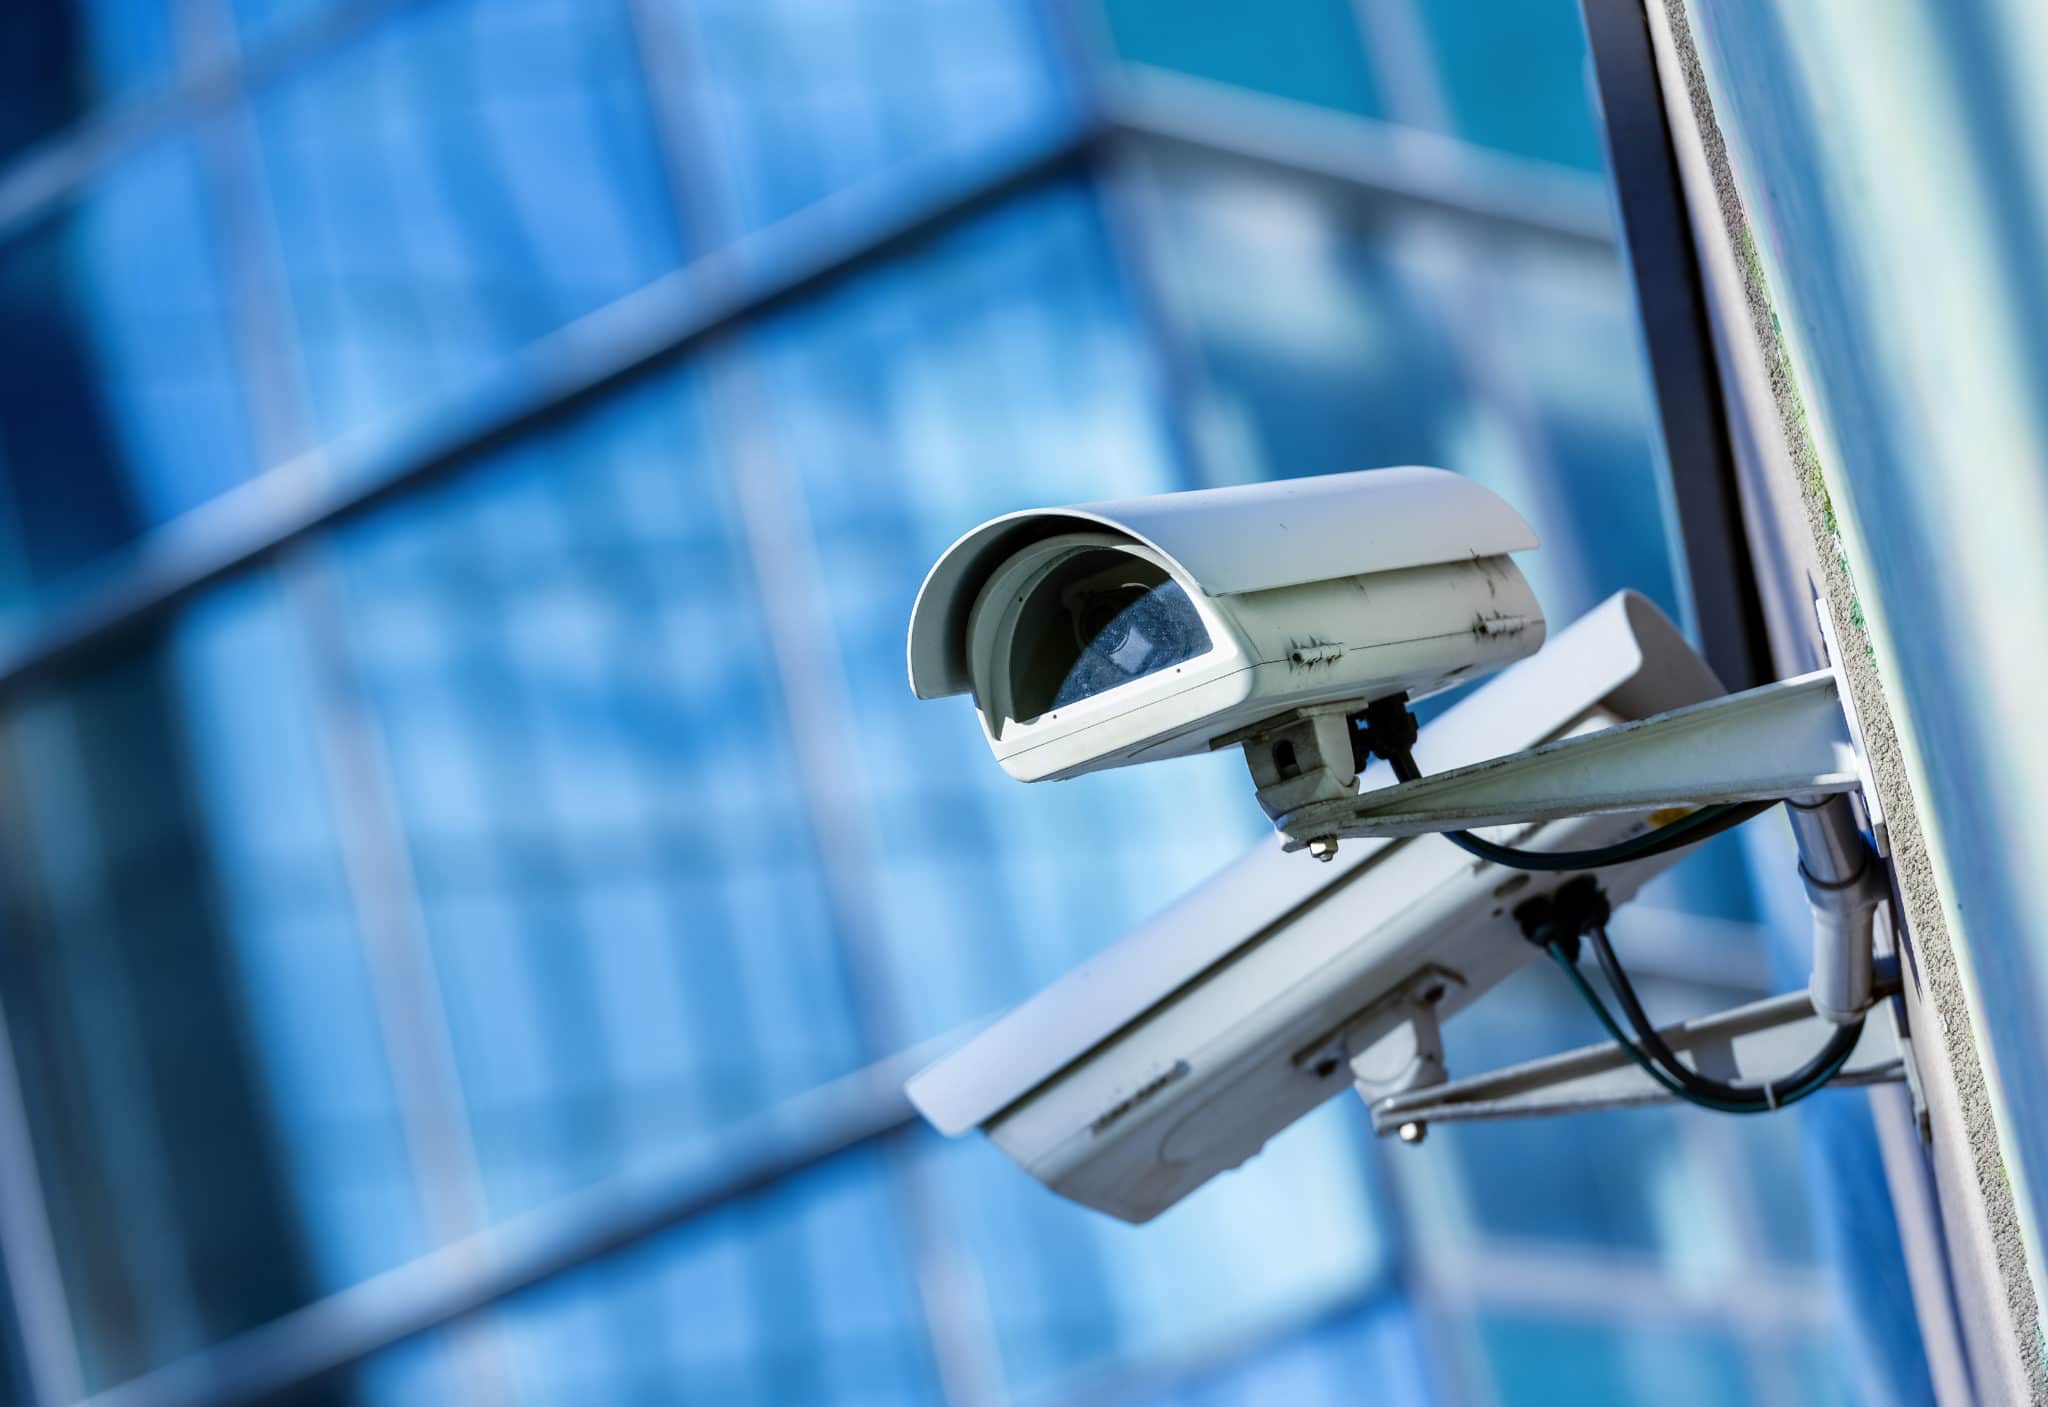 Benefits of CCTV for home security